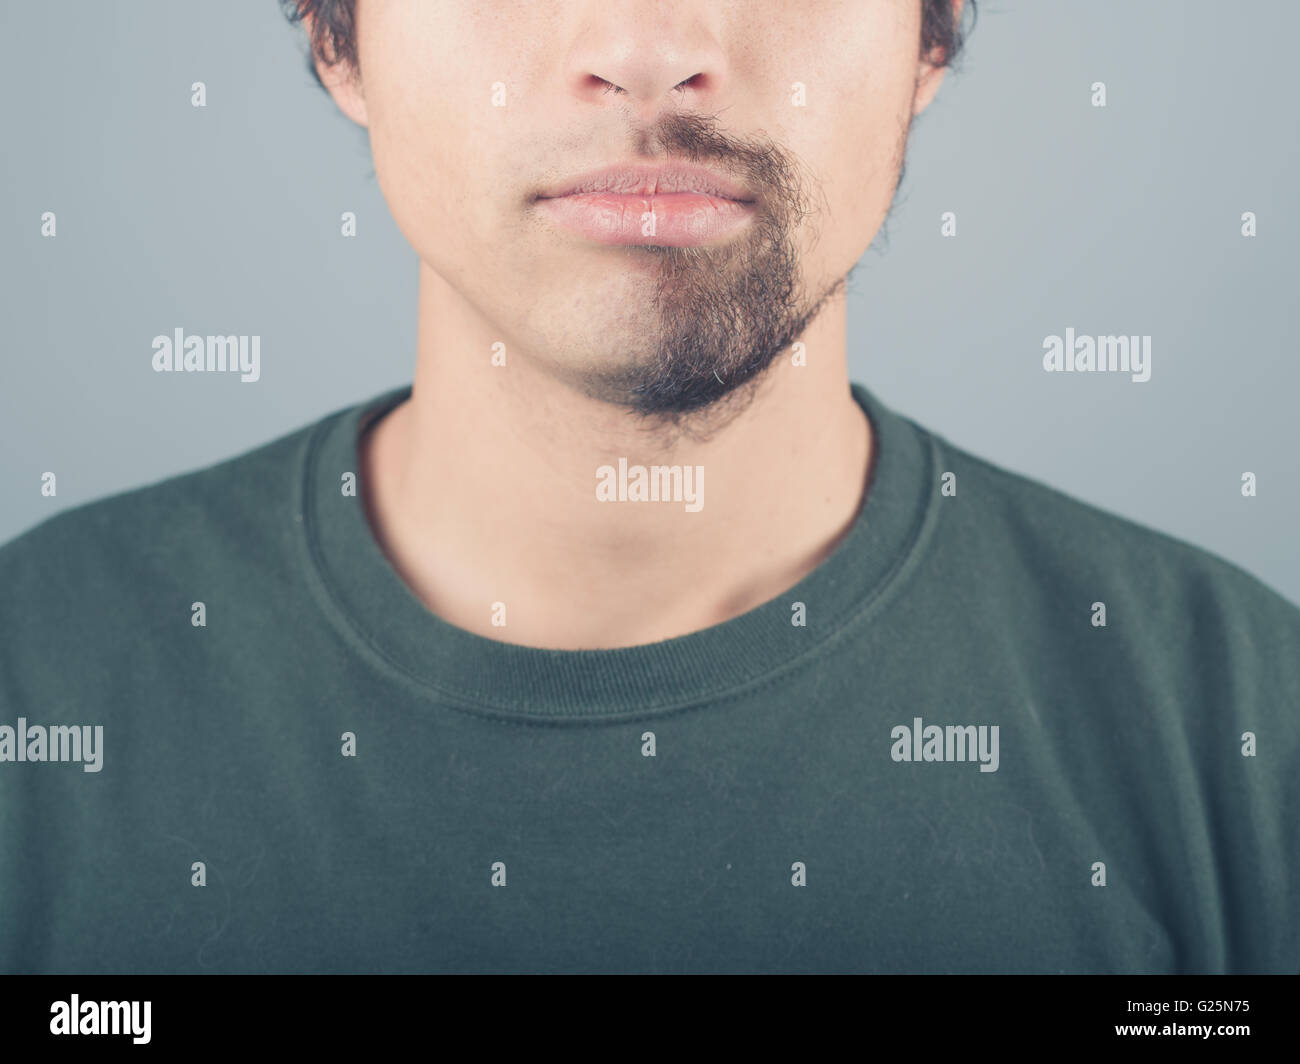 A young man with a half shaved beard Stock Photo